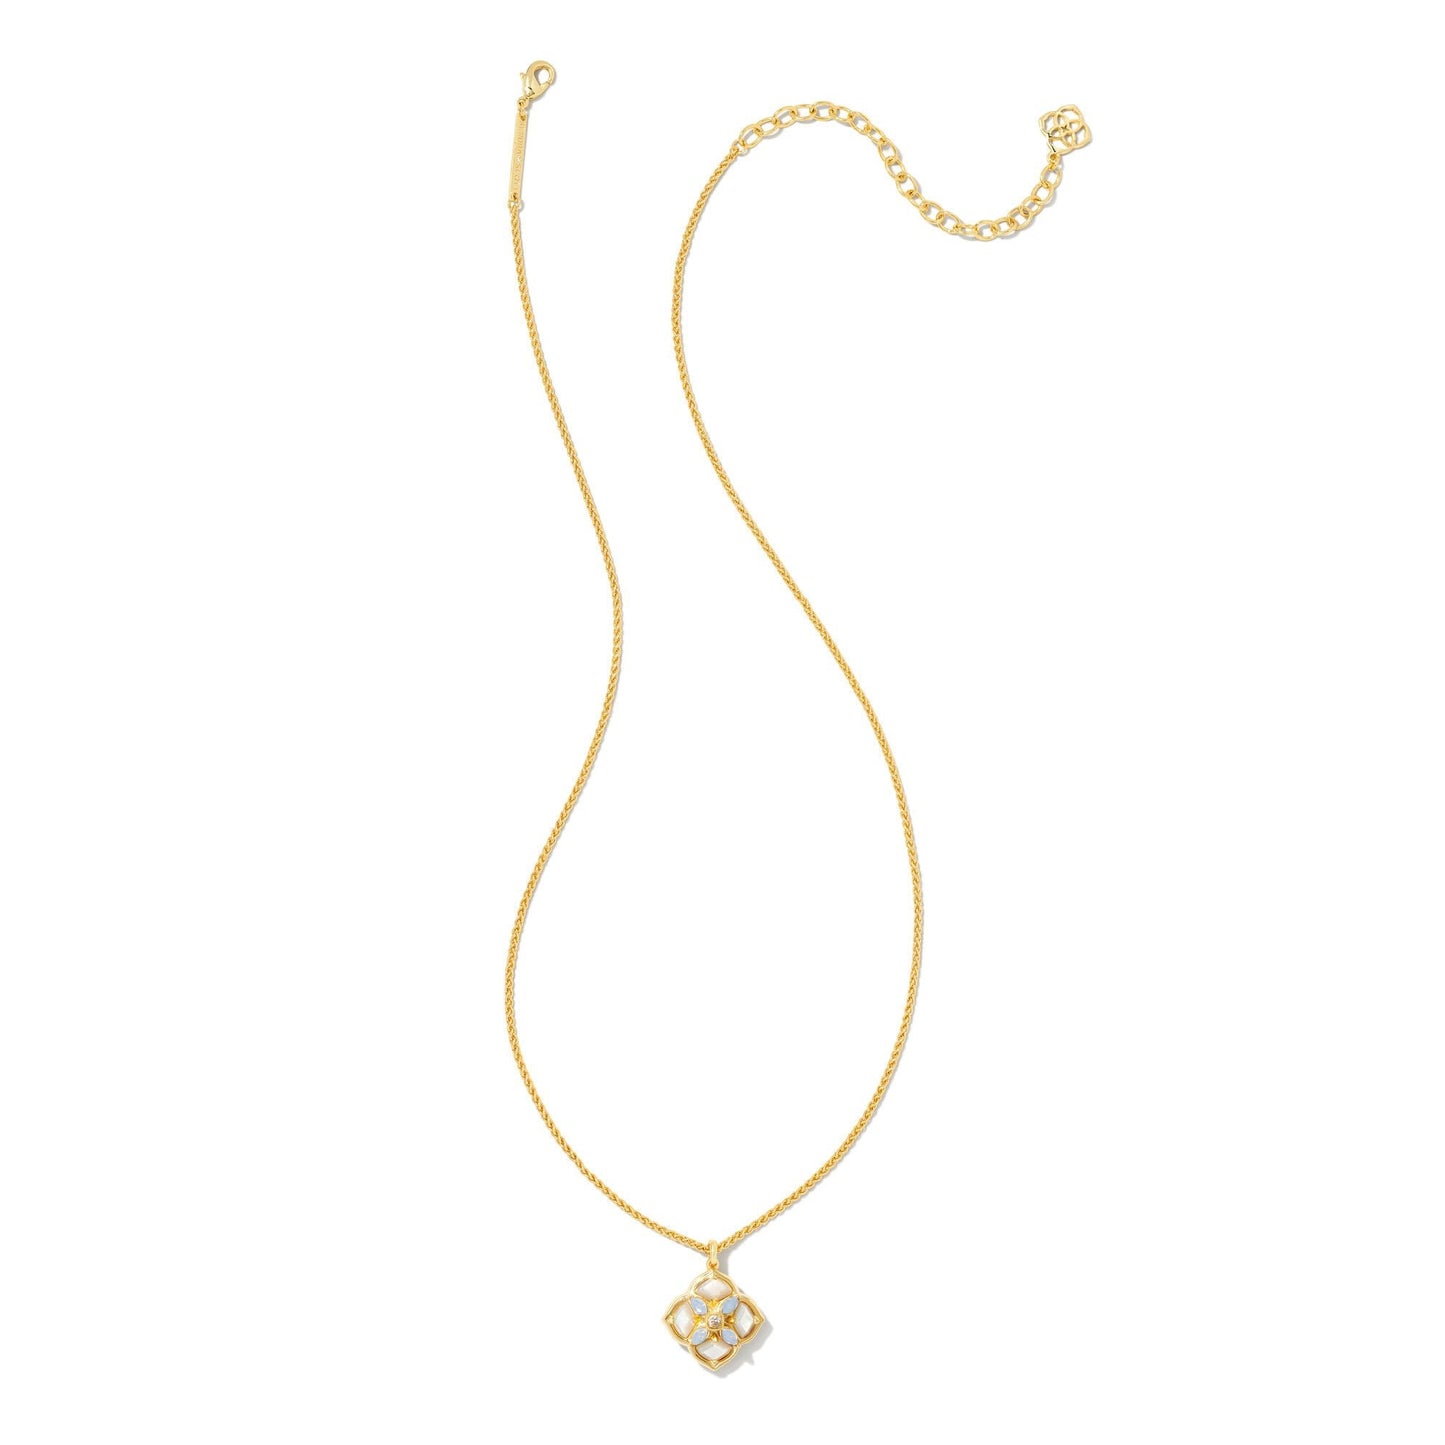 Dira Stone Pendant Necklace in Gold Ivory